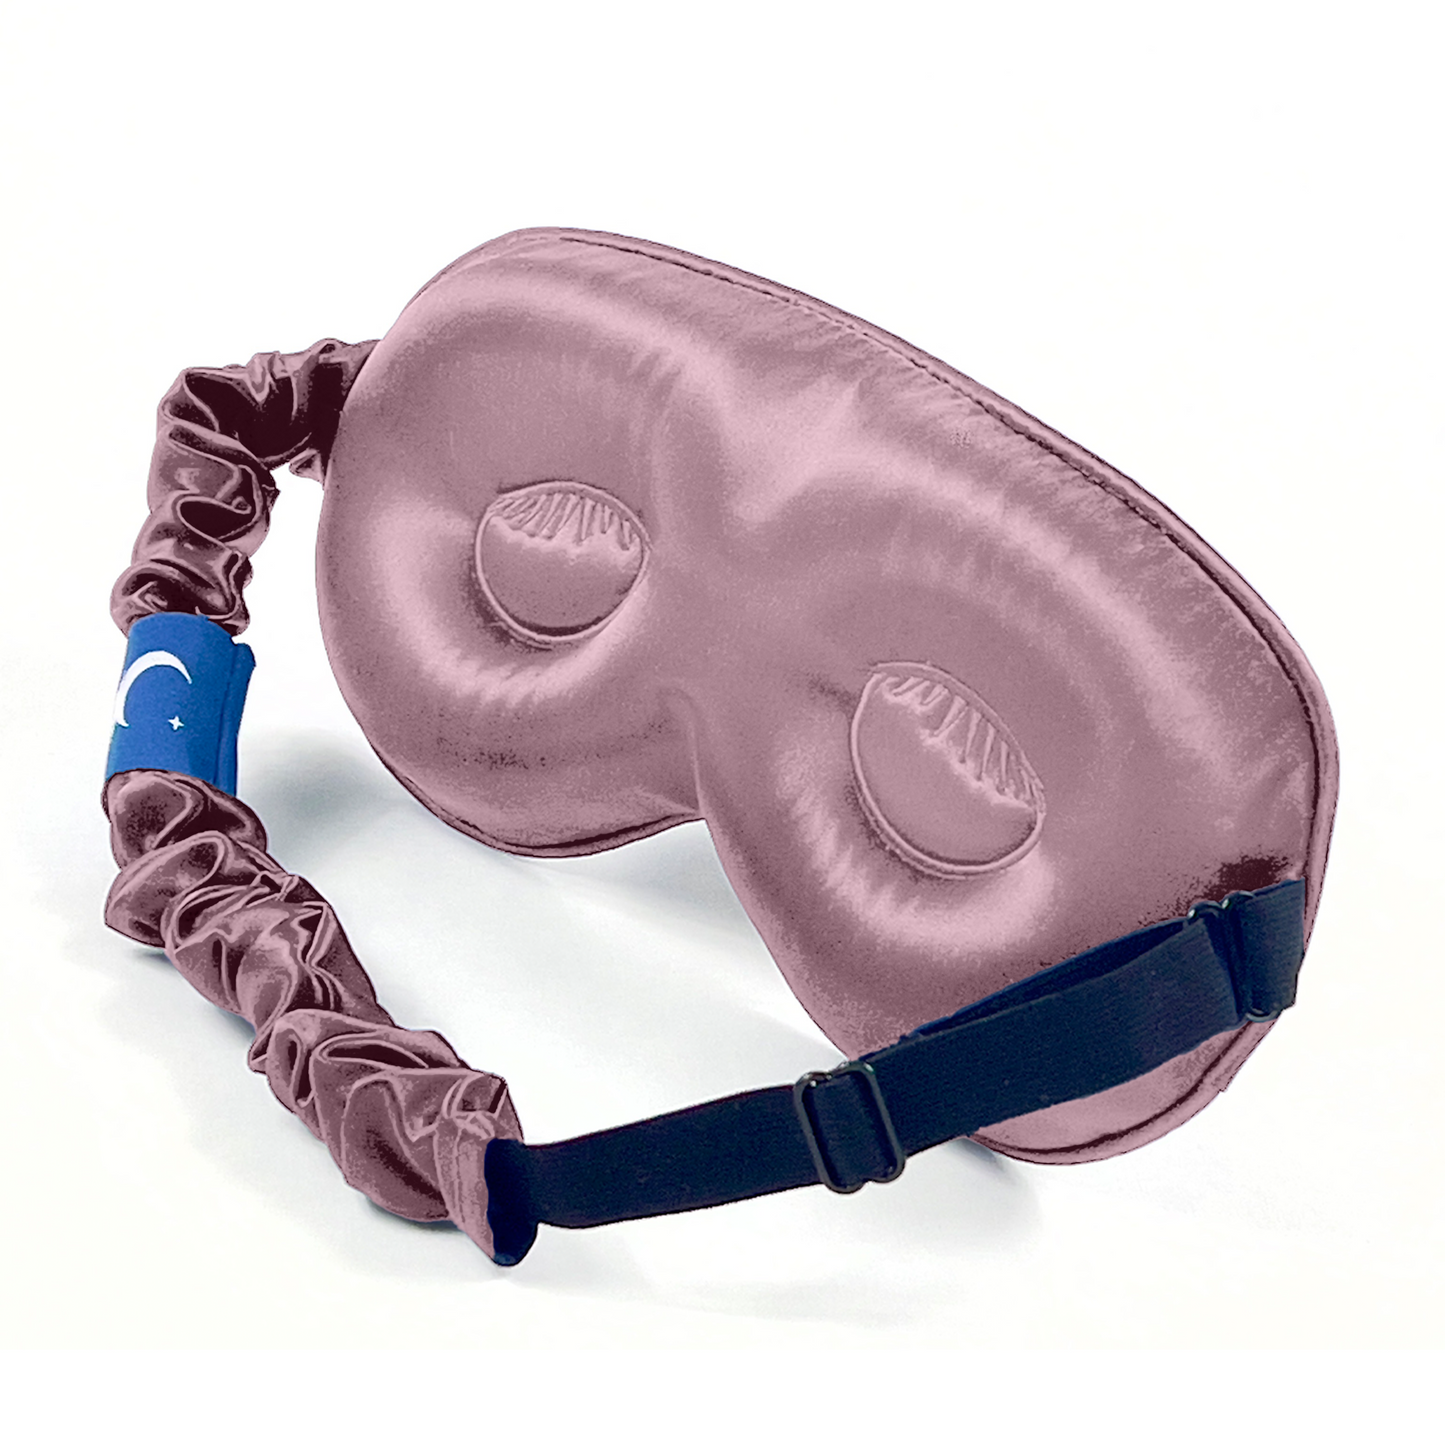 Sia Silk® Sleep Mask with extra deep eye cups for long lashes - Dusty Rose